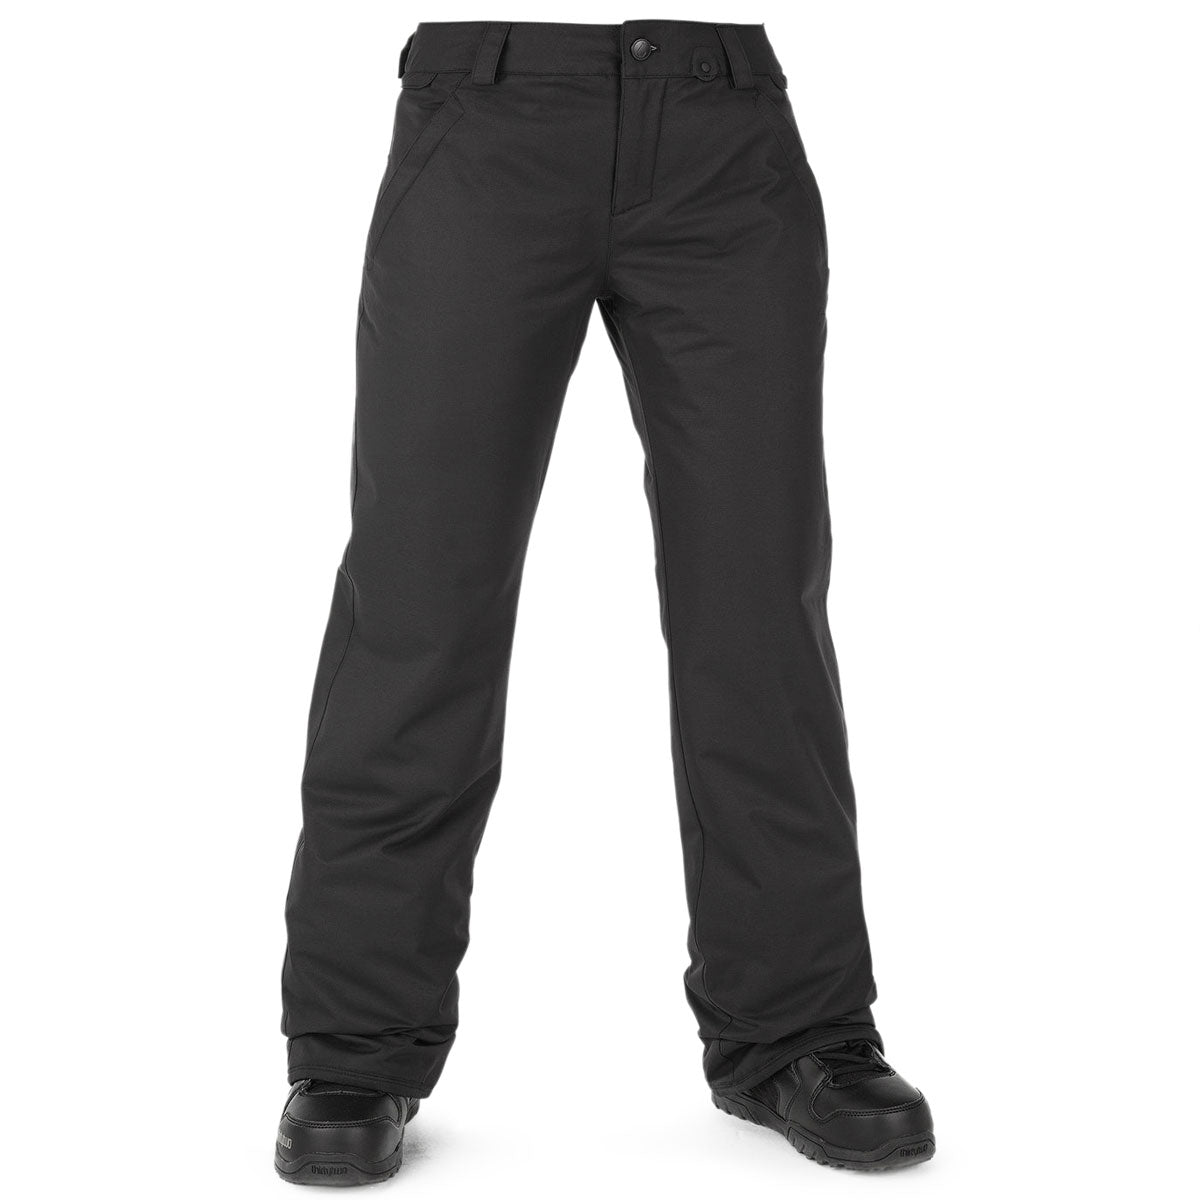 Volcom Womens Frochickie Ins Snowboard Pants - Black image 1